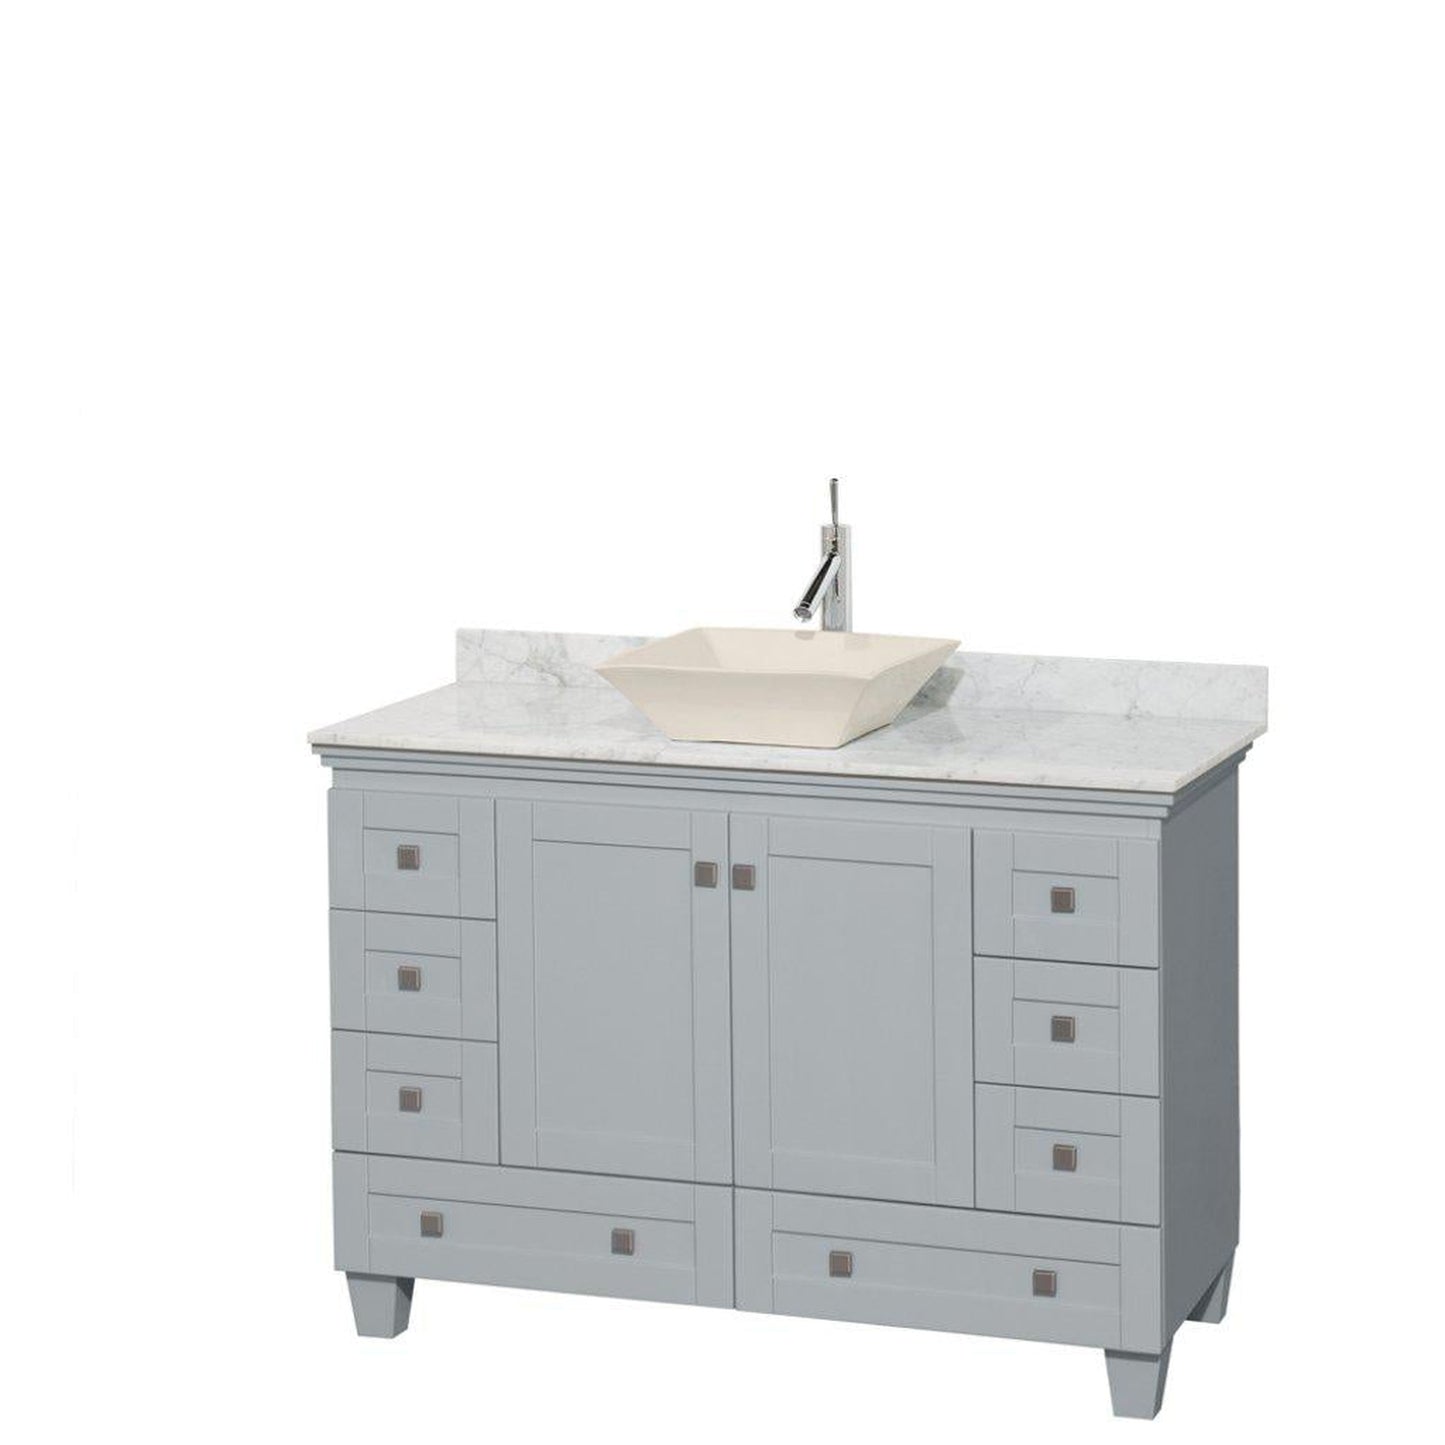 Wyndham Collection Acclaim 48" Single Bathroom Oyster Gray Vanity With White Carrara Marble Countertop And Pyra Bone Porcelain Sink